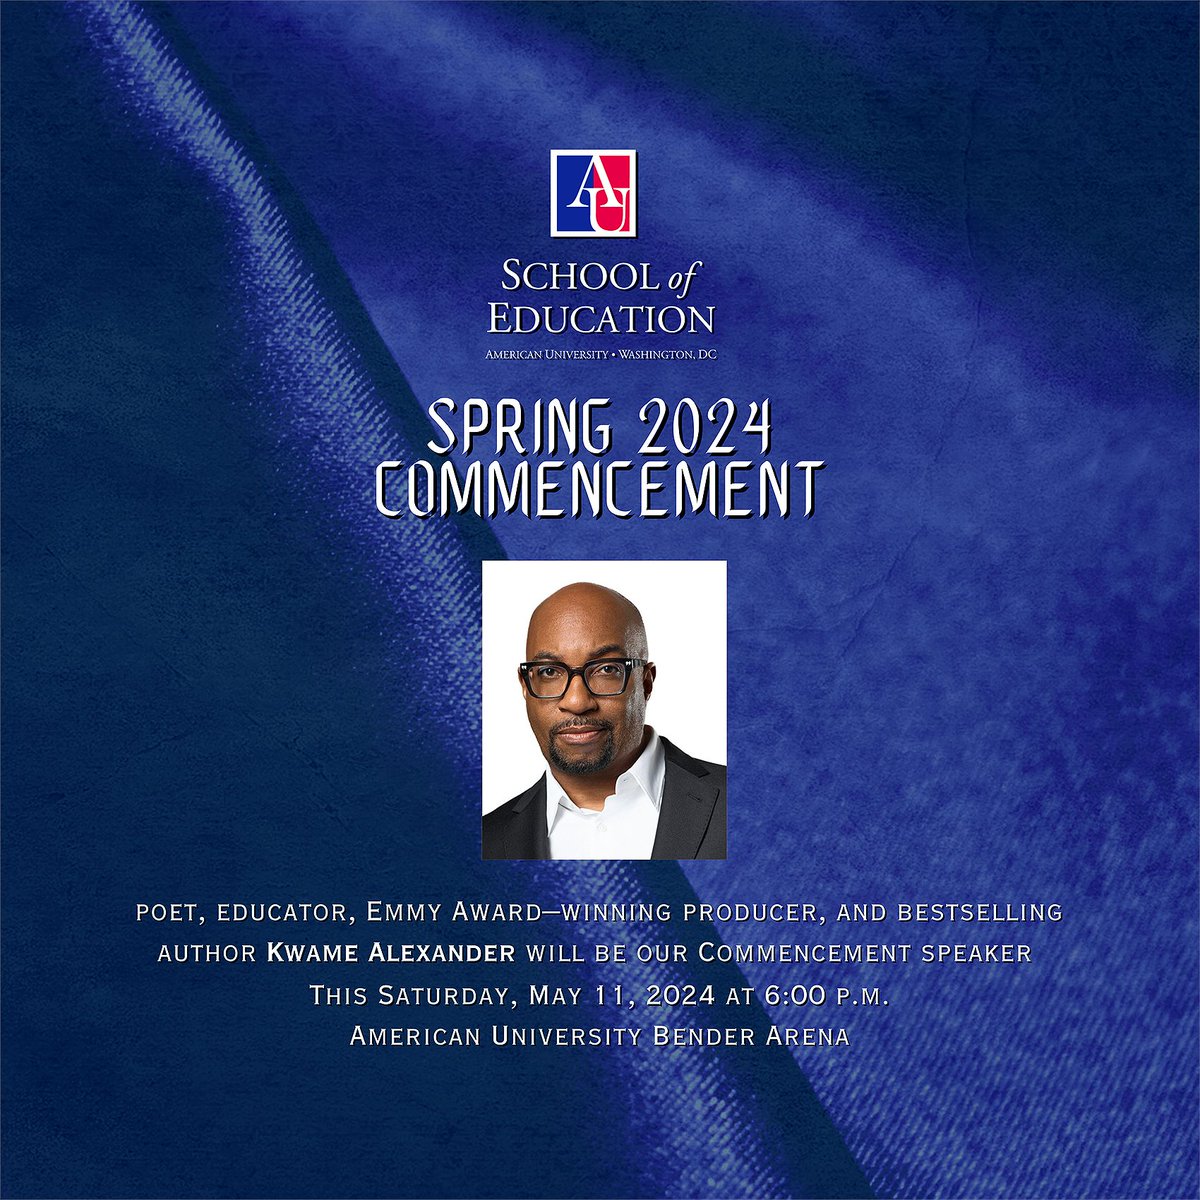 This Saturday > We are ecstatic that the brilliant poet, educator, Emmy Award–winning producer, and bestselling author @kwamealexander is the Honorary Degree recipient and Commencement speaker for the School of Education Commencement Ceremony. @AmericanU #2024AUGrad 🦅🎓